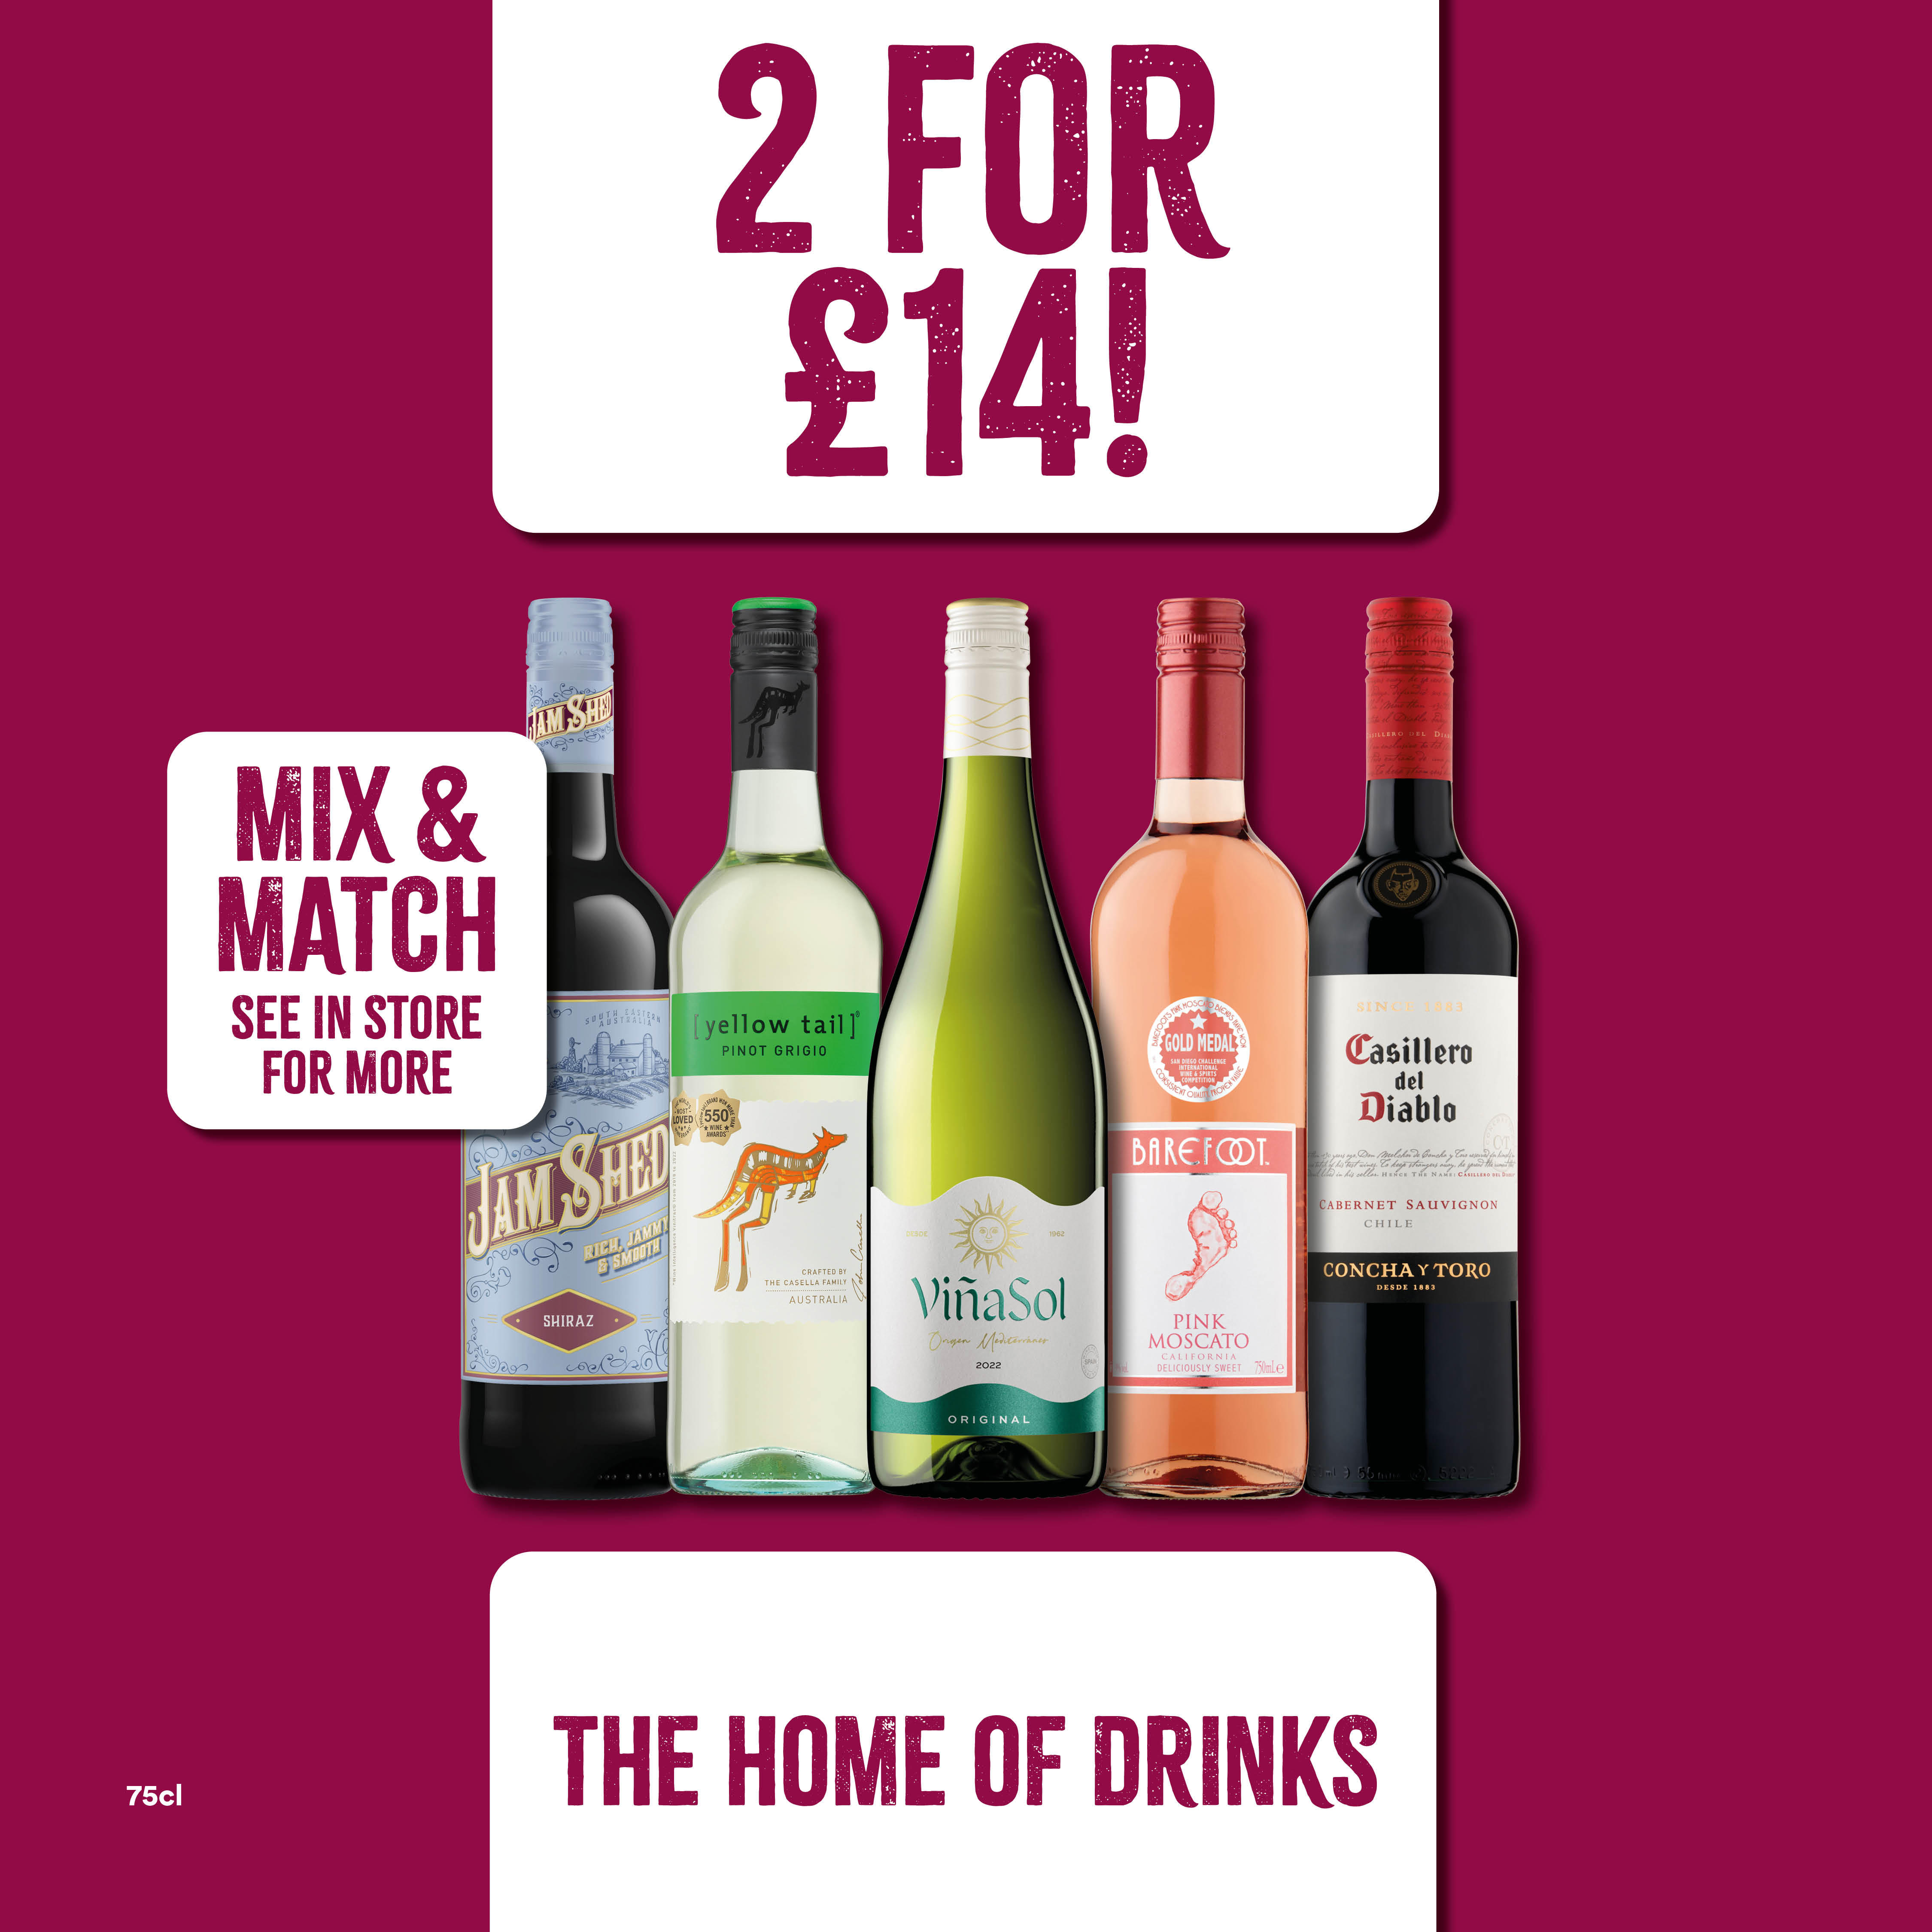 2 for £14 on selected wines Bargain Booze Newport Pagnell 01908 612653